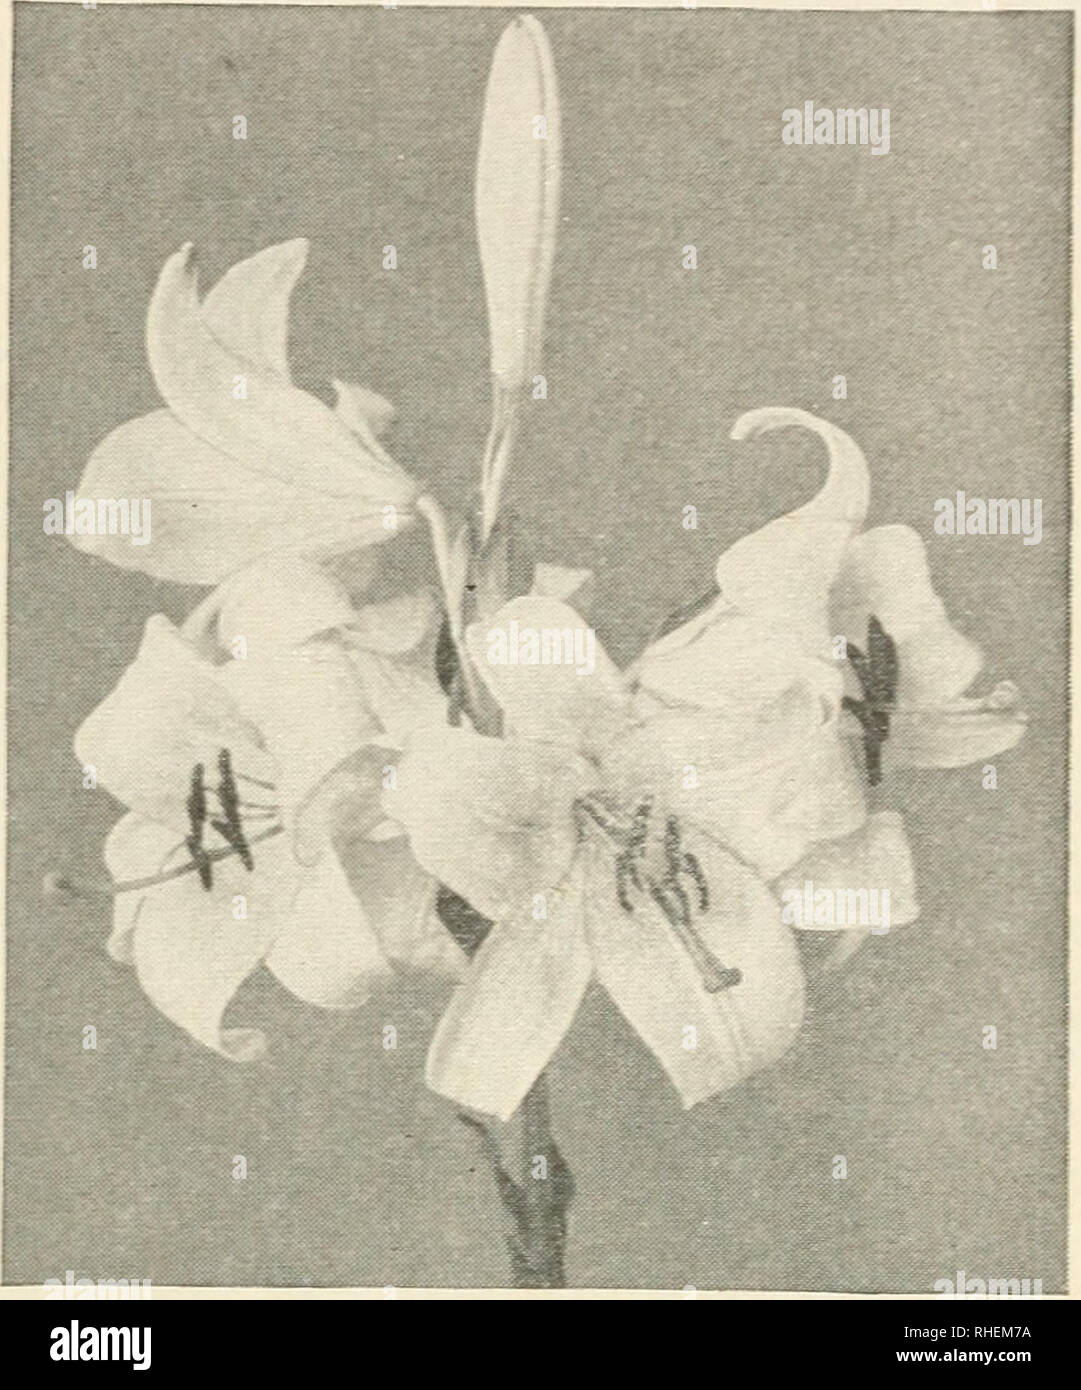 . Bolgiano's selected bulbs plants seeds for 1939 fall planting. Nurseries (Horticulture) Catalogs; Bulbs (Plants) Catalogs; Seeds Catalogs. F. W. BOLGIANO &amp; CO., WASHINGTON, D. C. 13. Lilium Candidam Hardy Lilies for Fall Planting Most Lily bulbs being of late ma- turity are not ready for delivery un- til October and November. It is ad- visable to prepare the bed in early autumn and cover with 3 or 4 inches of mulch. This will prevent freezing and will enable you to plant bulbs safely on arrival. LILIUM CANDID L'M (Annunciation or Madonna Lily). Northern France grown. (September delivery. Stock Photo